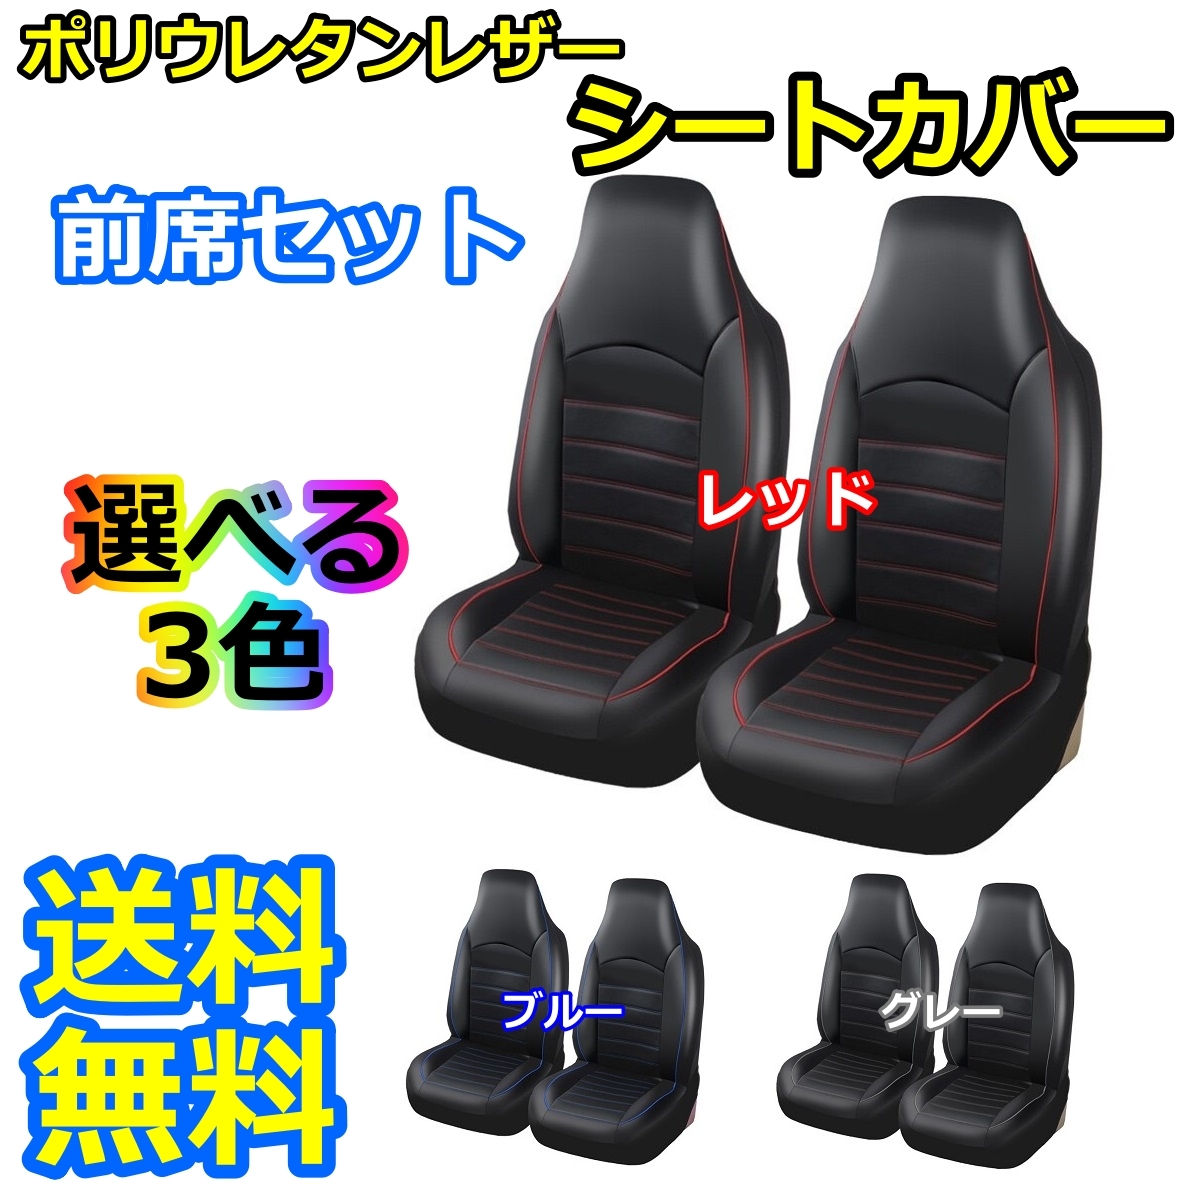  seat cover CR-Z ZF1 CRZ polyurethane leather front seat set ... only Honda is possible to choose 3 color AUTOYOUTH